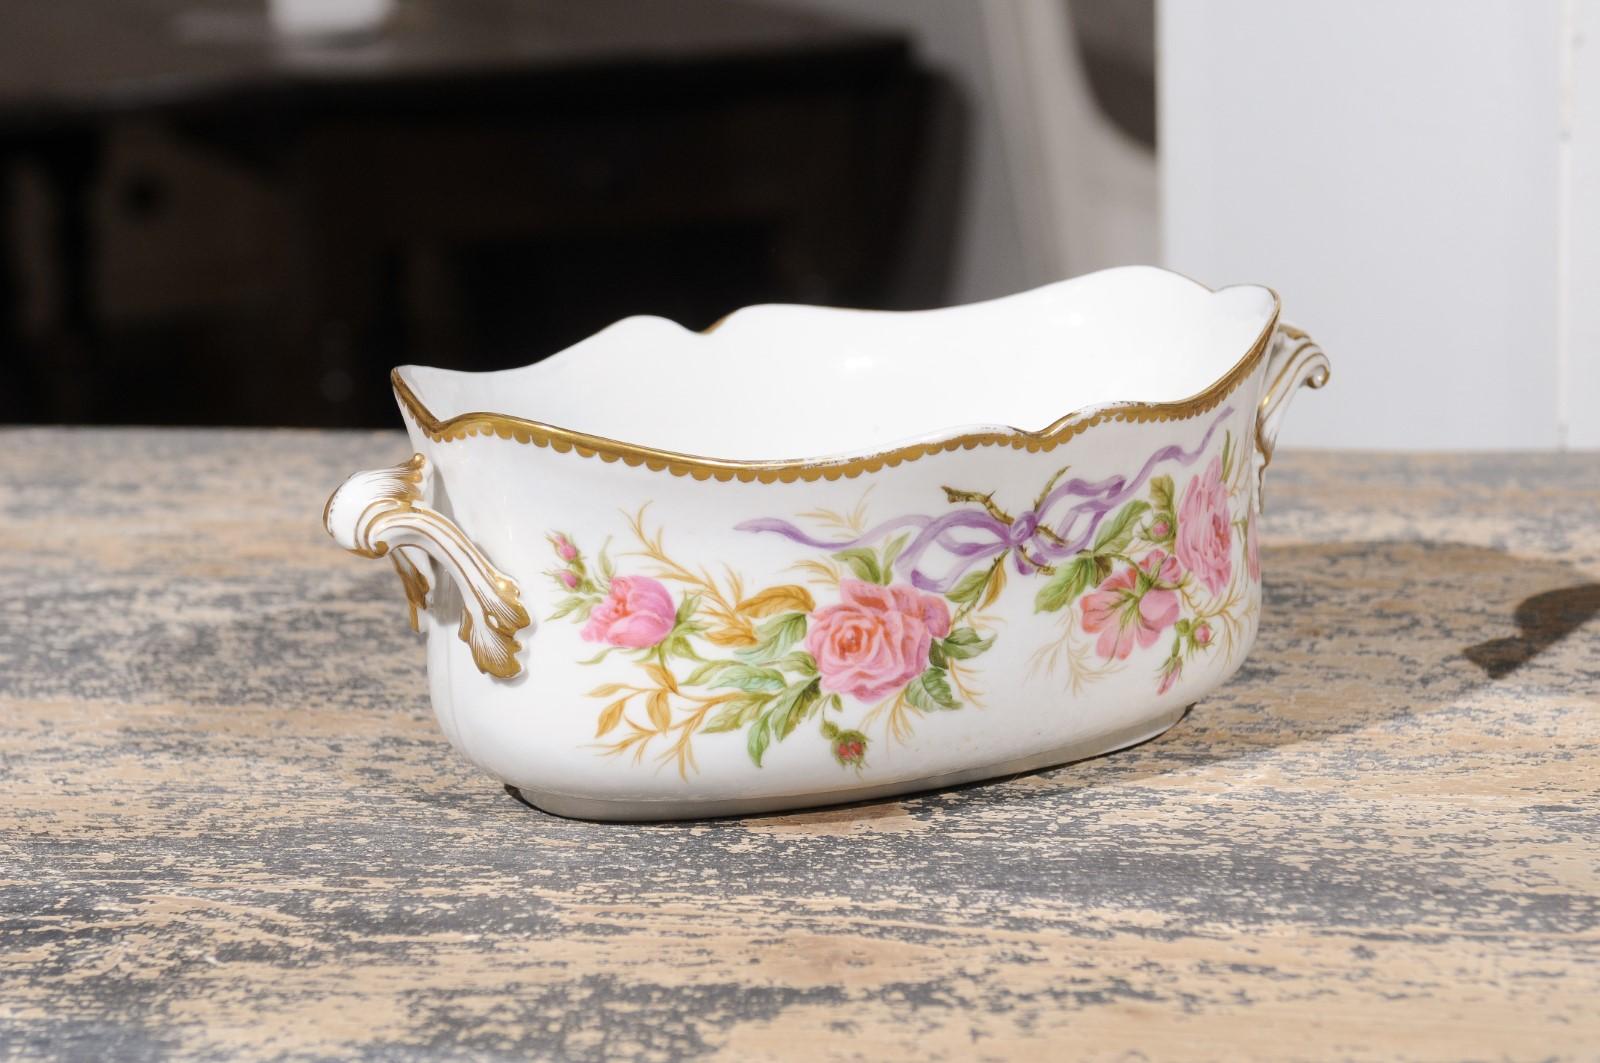 20th Century English Porcelain Bowls Depicting Bouquets of Pink Roses with Gilt Accents For Sale